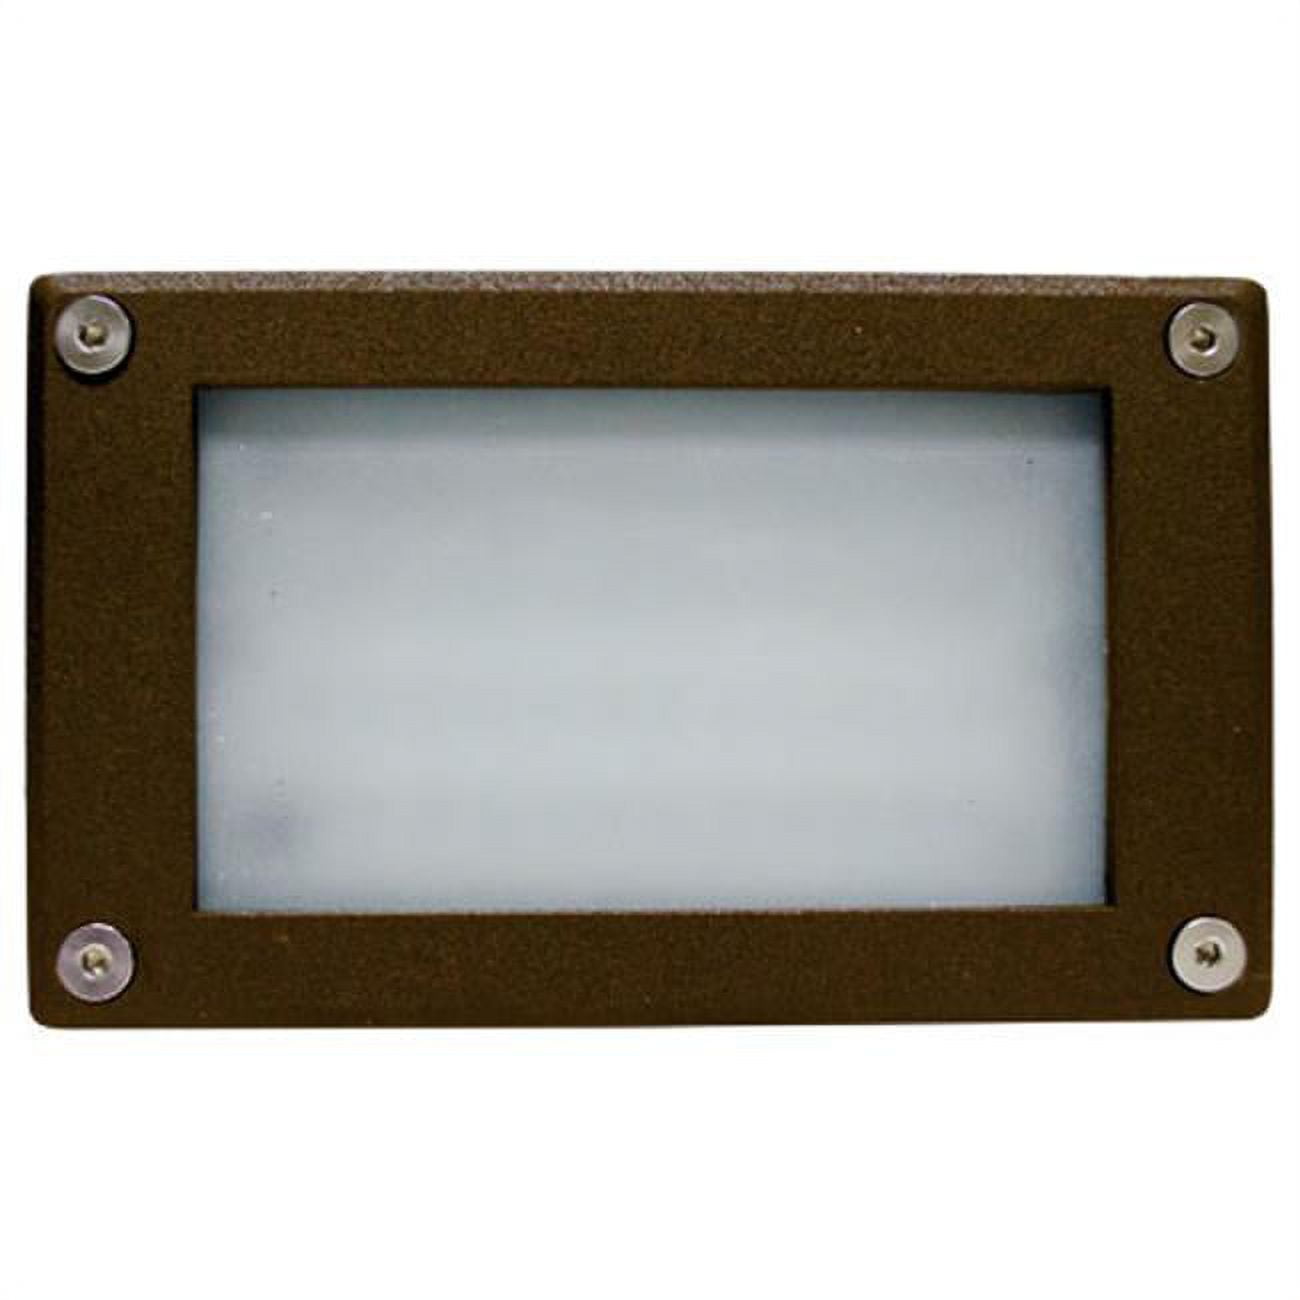 Picture of Dabmar Lighting LV650-BZ Cast Aluminum Recessed Open Face Brick, Step & Wall Light, Bronze - 3.88 x 6.44 x 2.63 in.